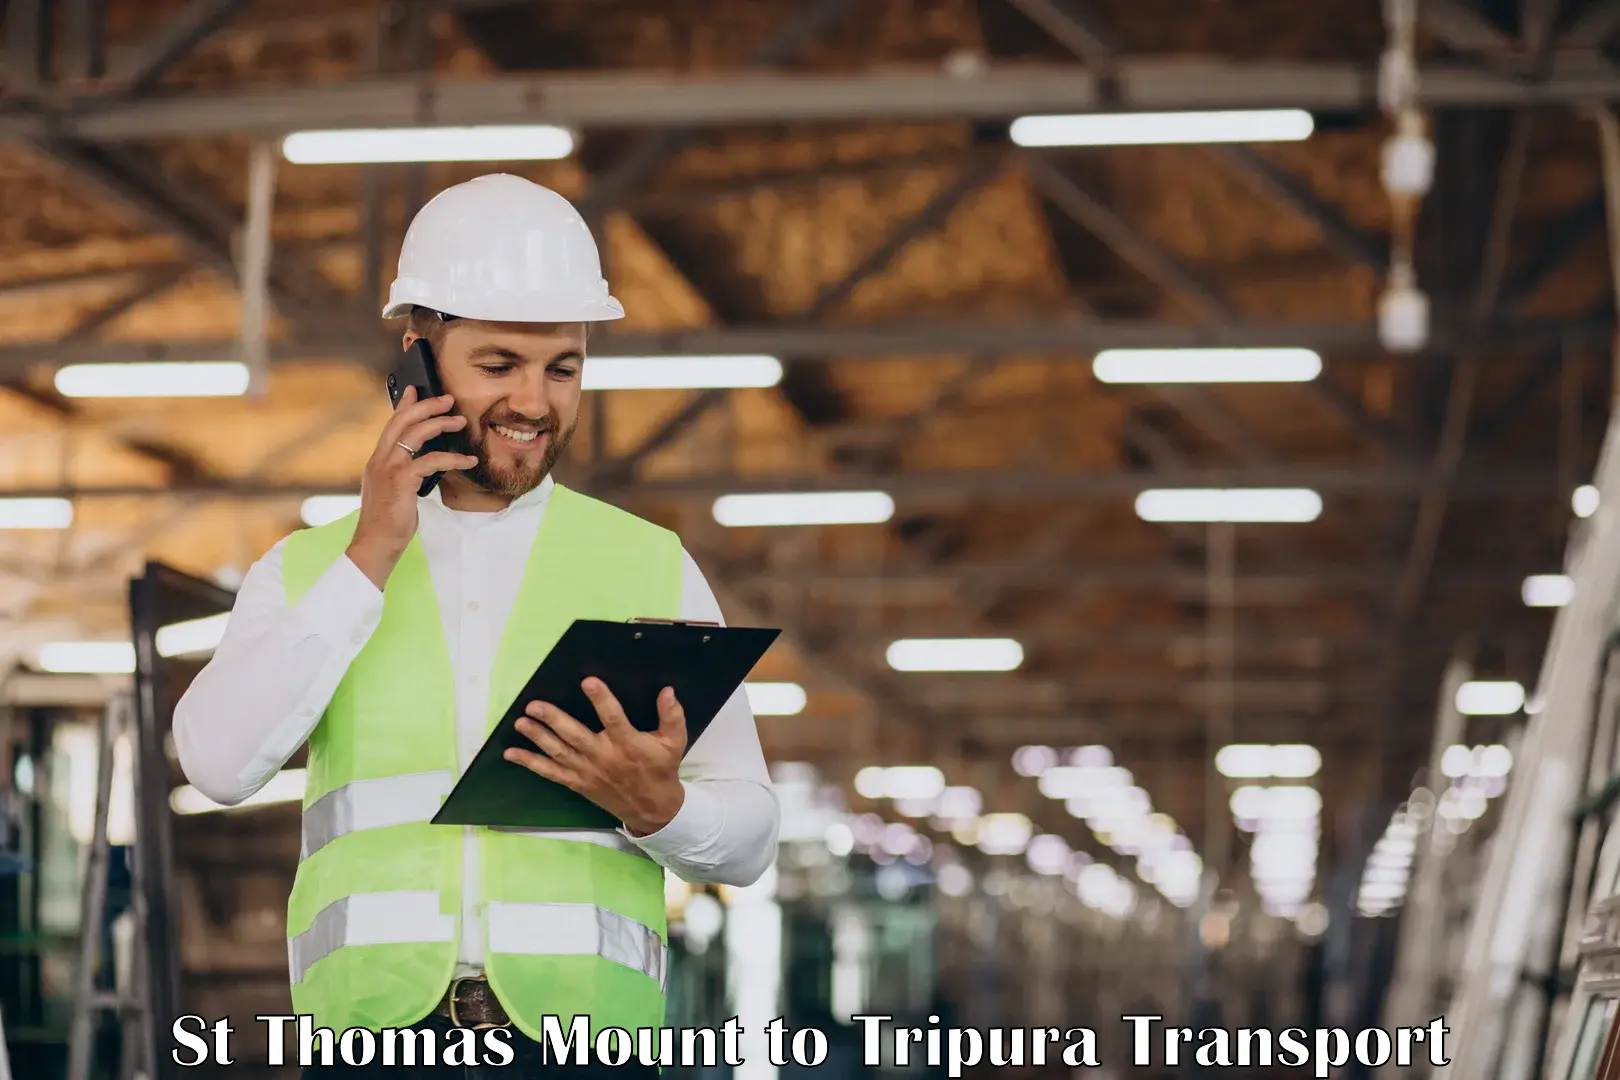 Commercial transport service St Thomas Mount to Tripura